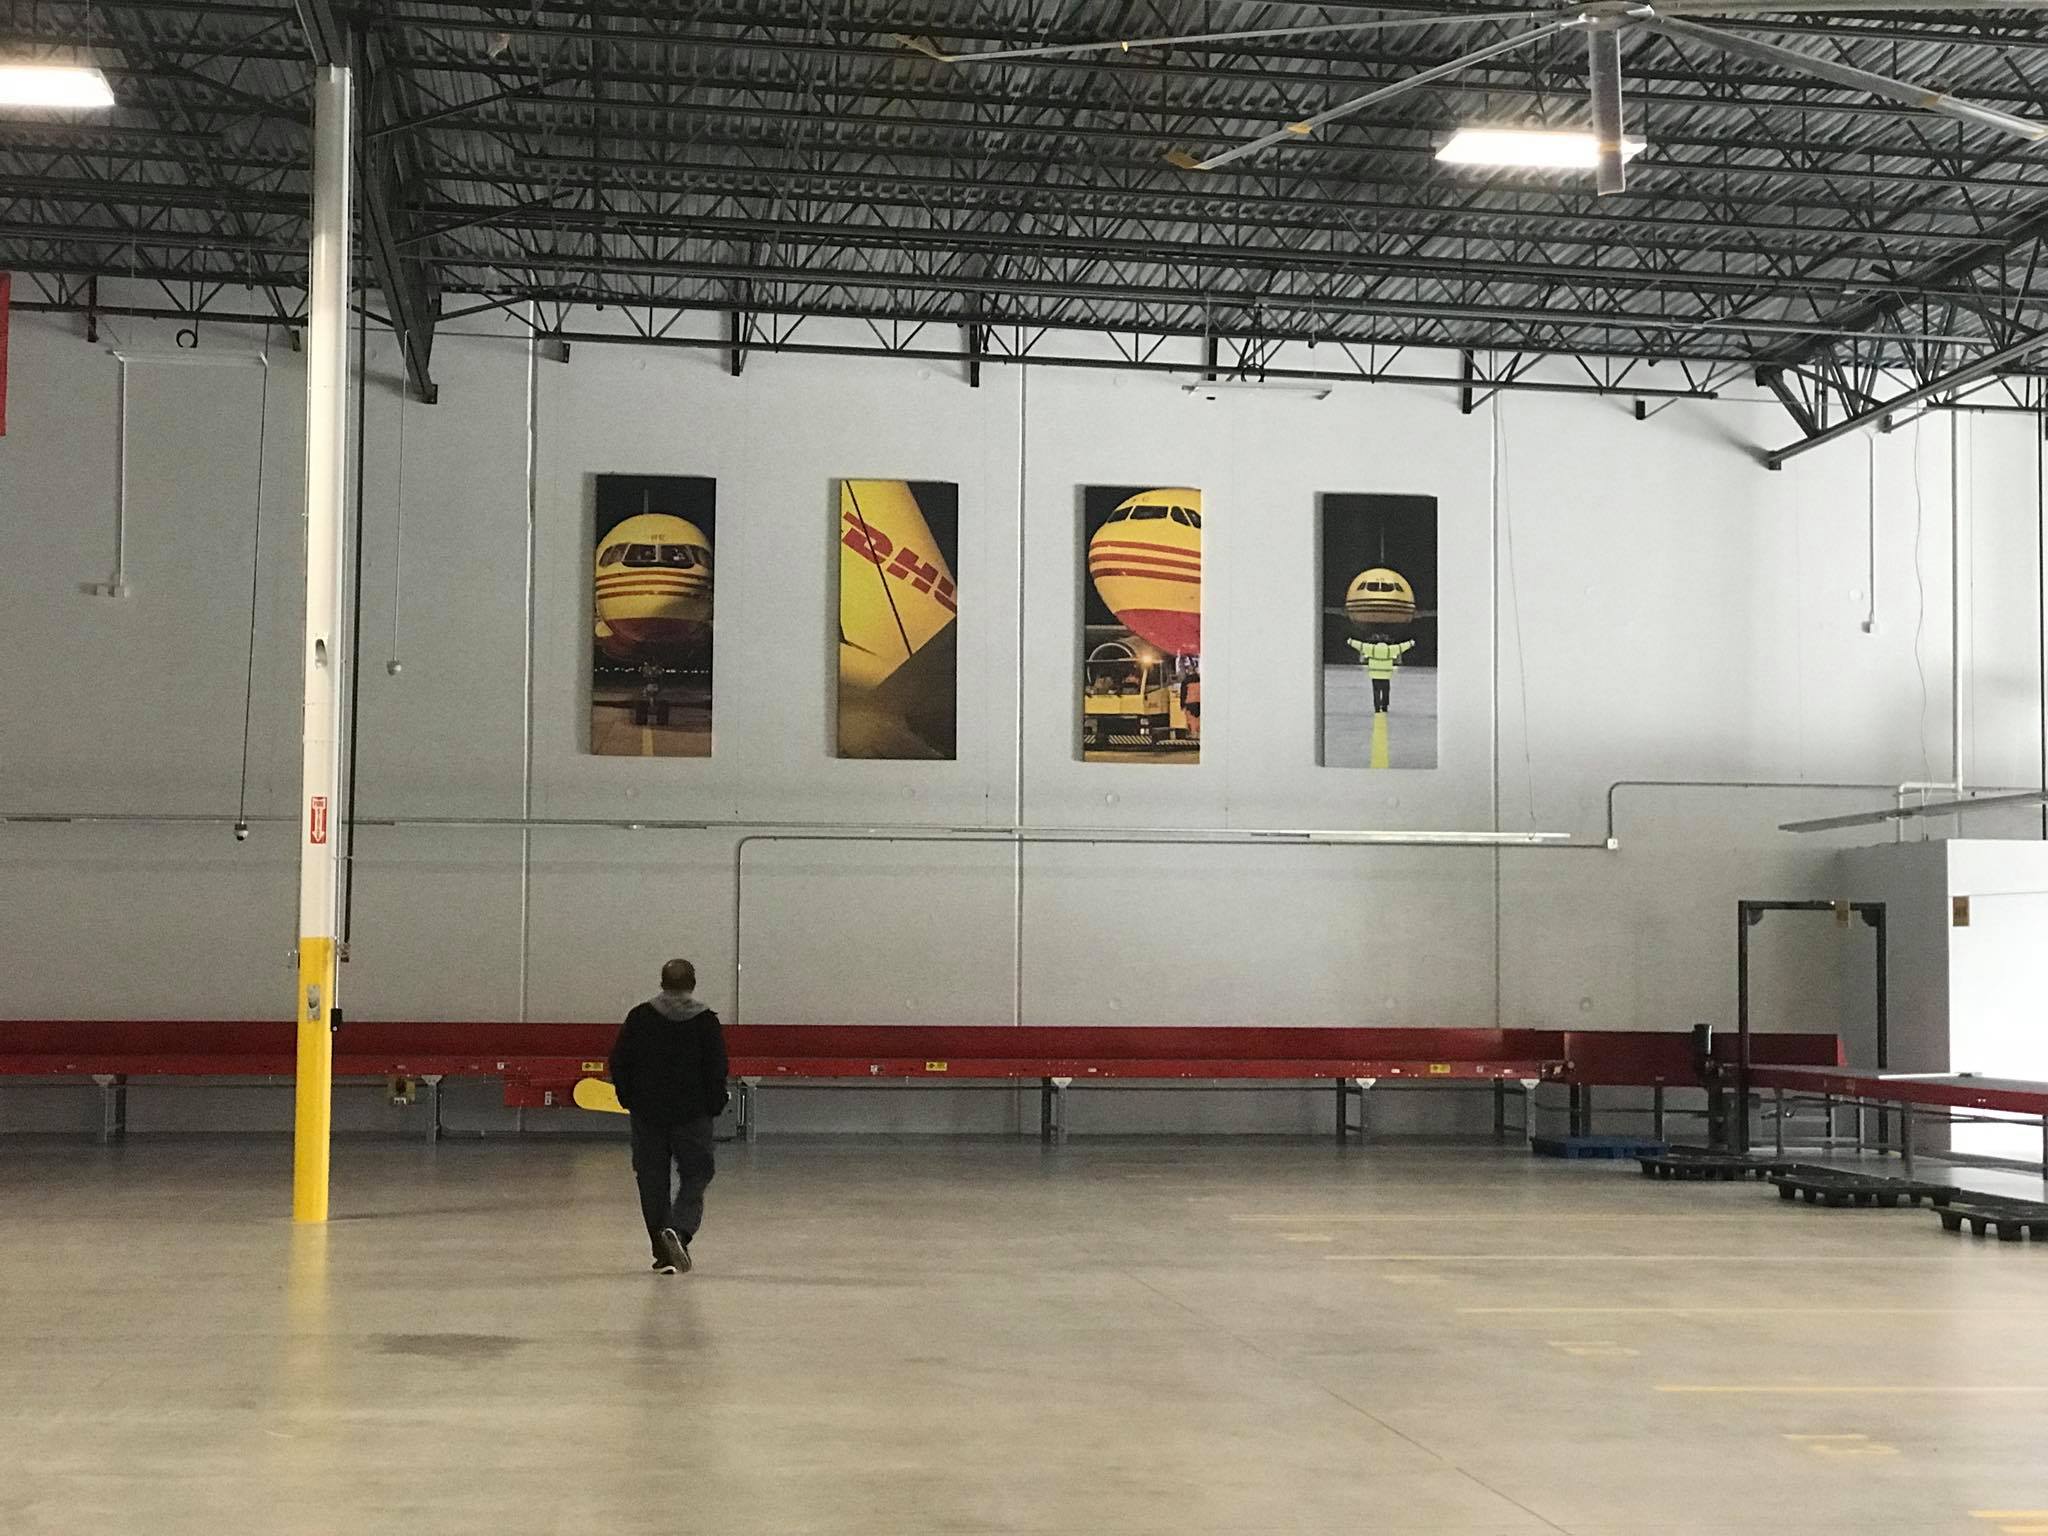 inside large warehouse with 4 canvas banners hanging on the wall